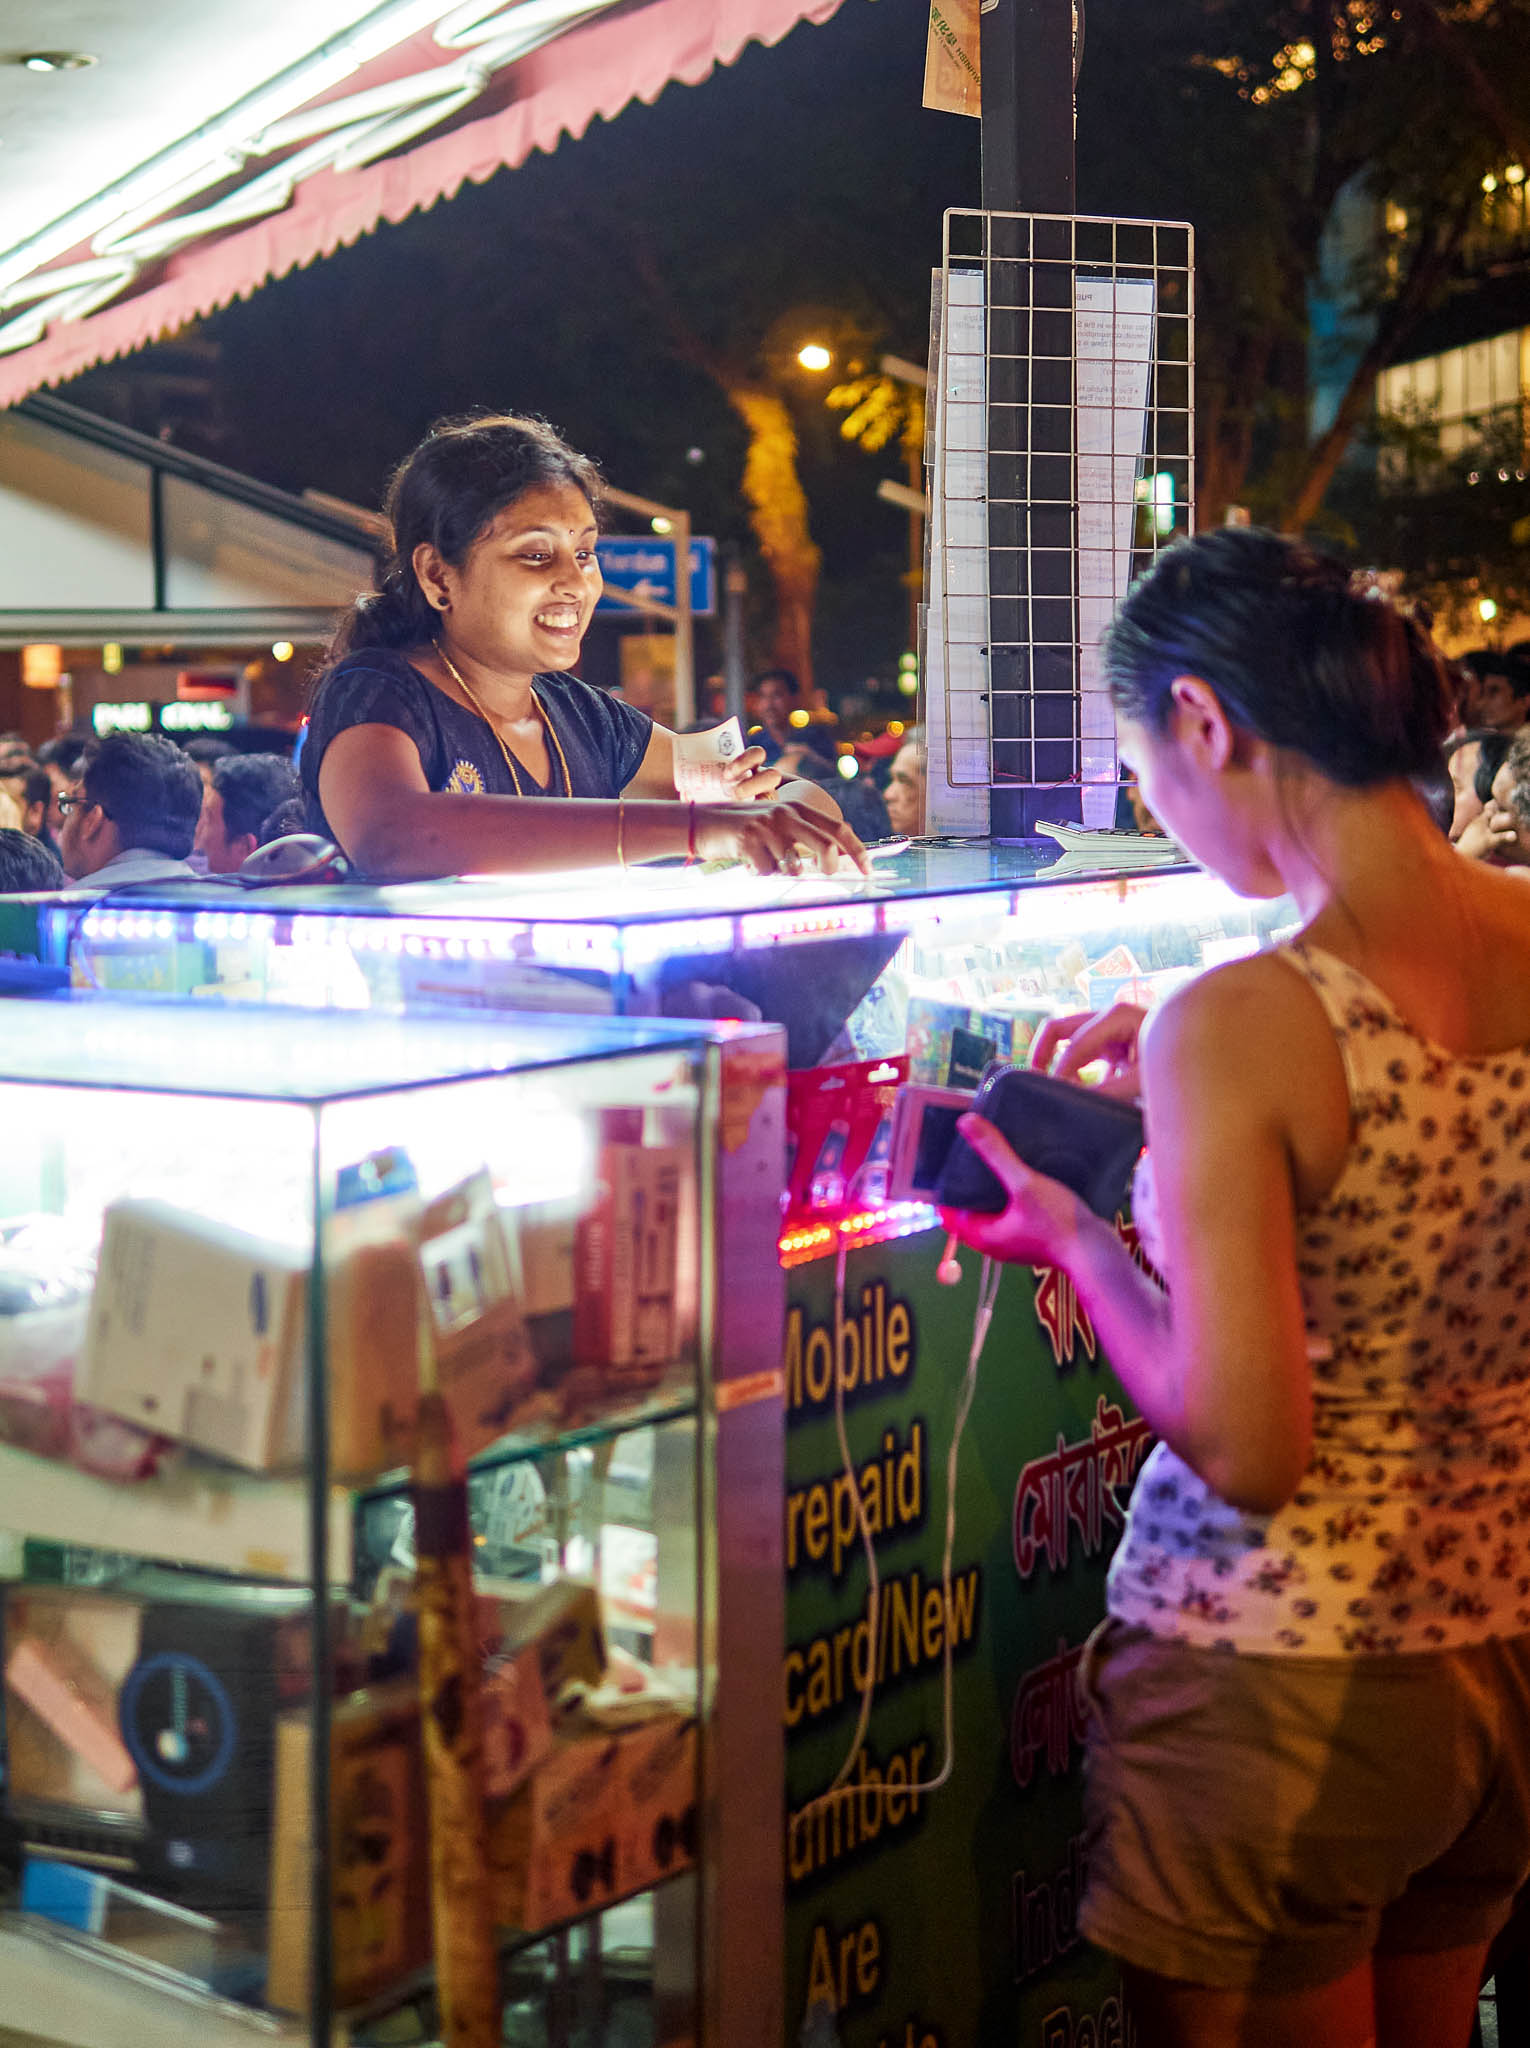 A woman vendor selling mobile phone cards, Kitchener Road, Singapore